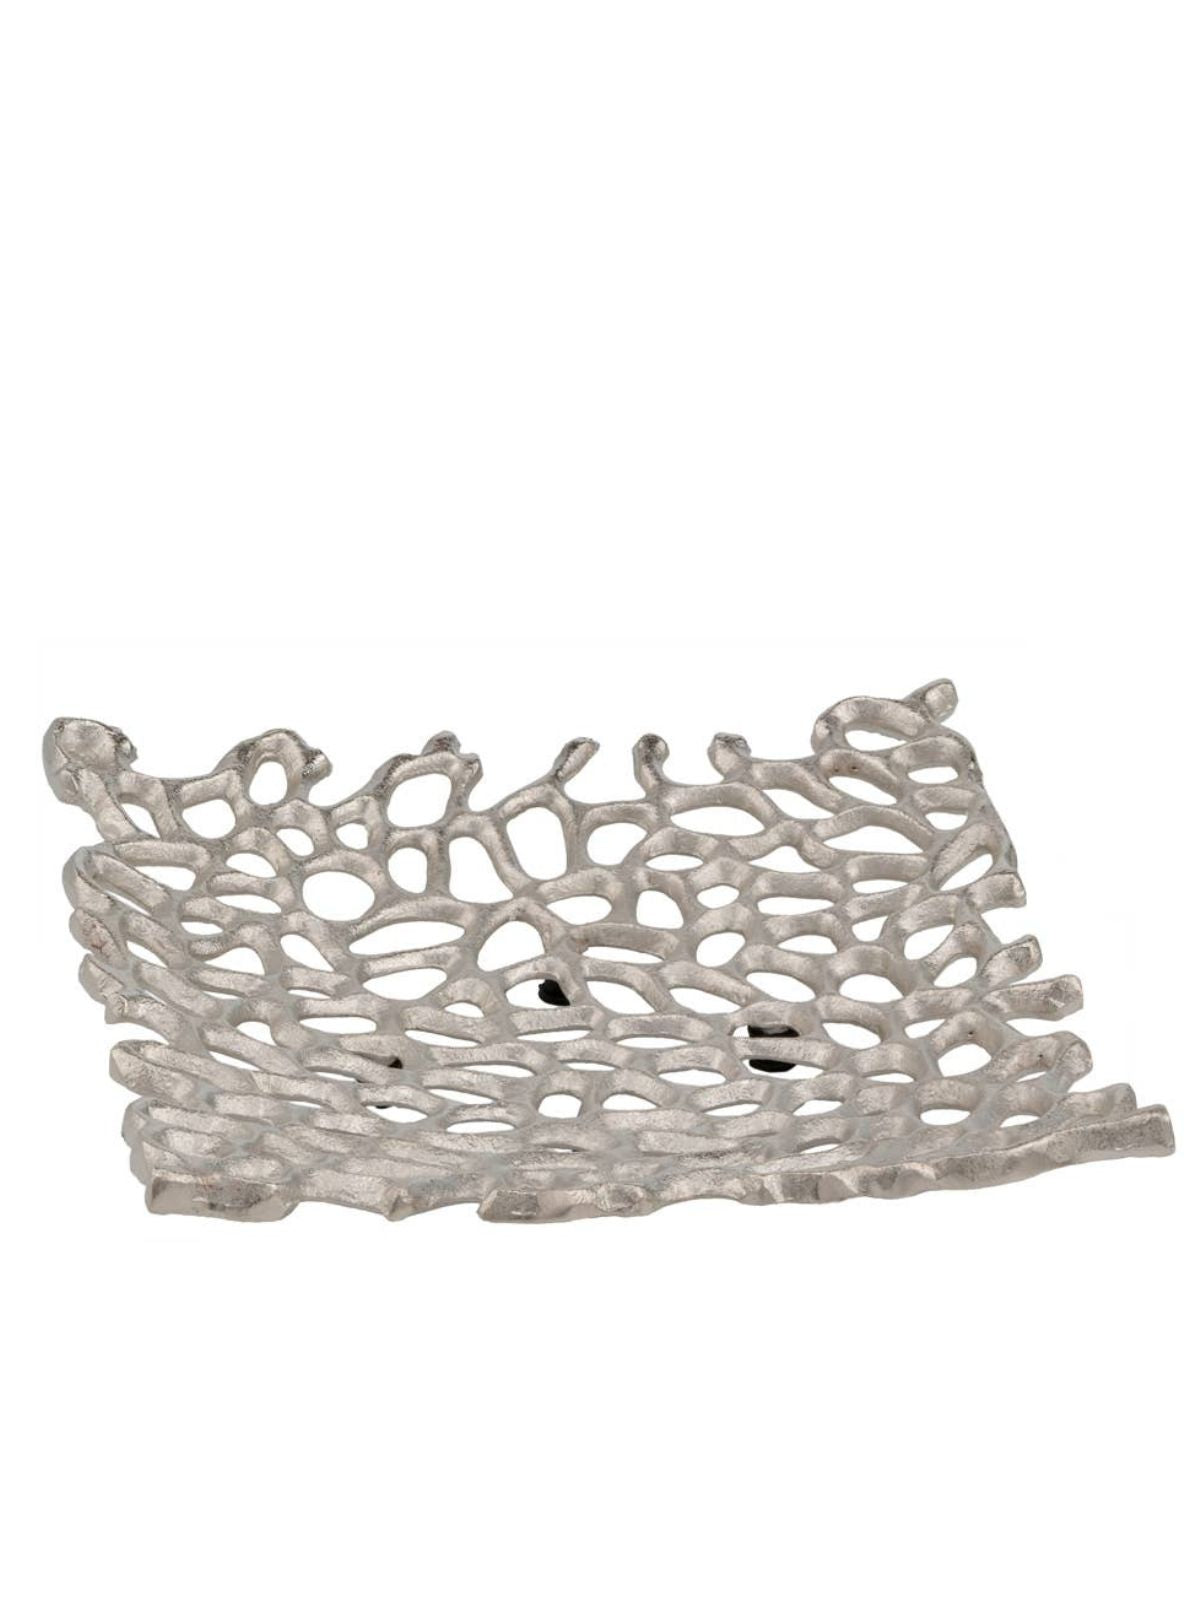 This Shiny Nickel Squared Plate with an open connected coral design is enticing accessory